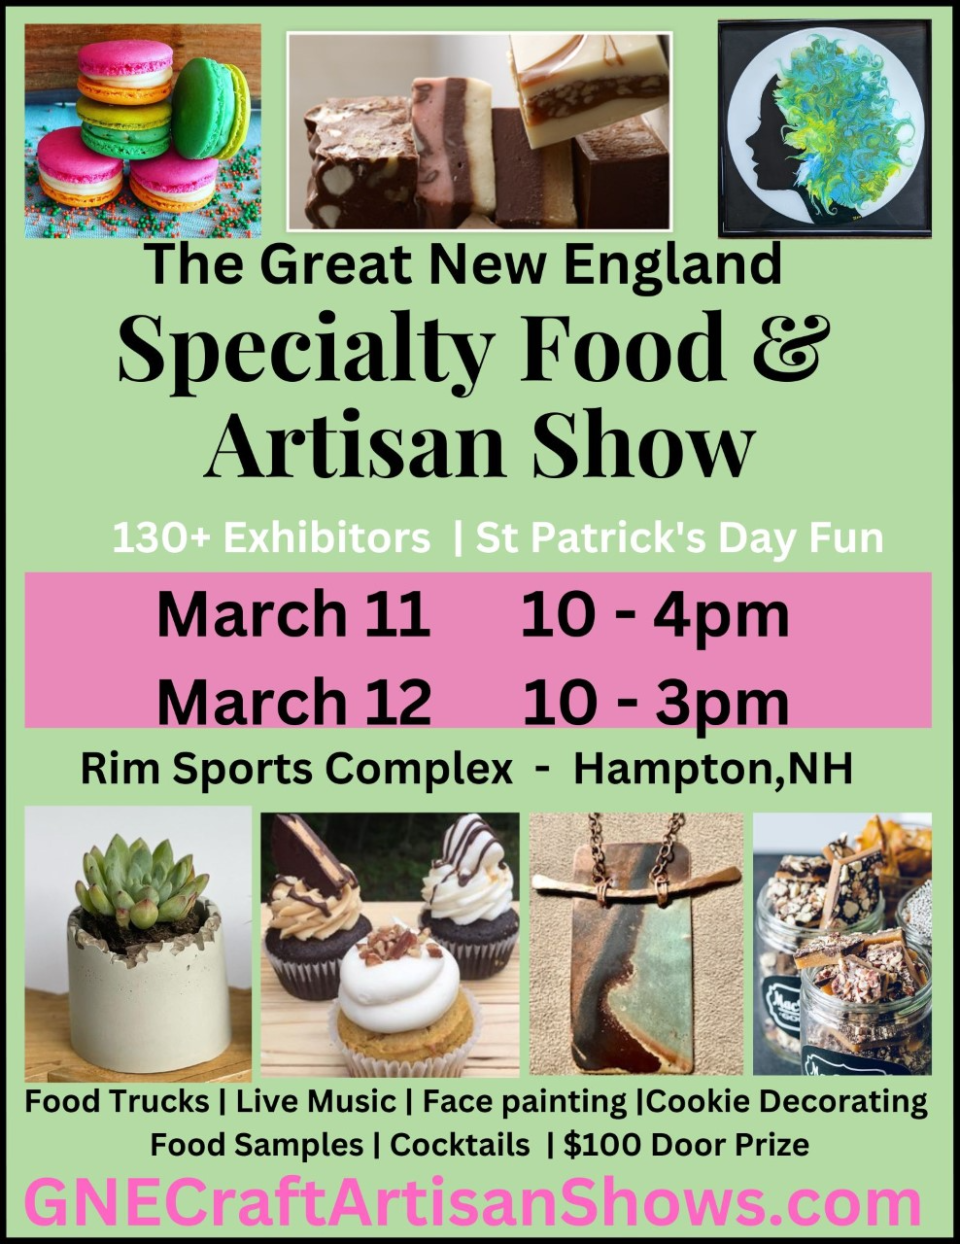 The Great New England Craft & Artisan show is coming to the Seacoast on Saturday, March 11 and Sunday, March 12, 2023.